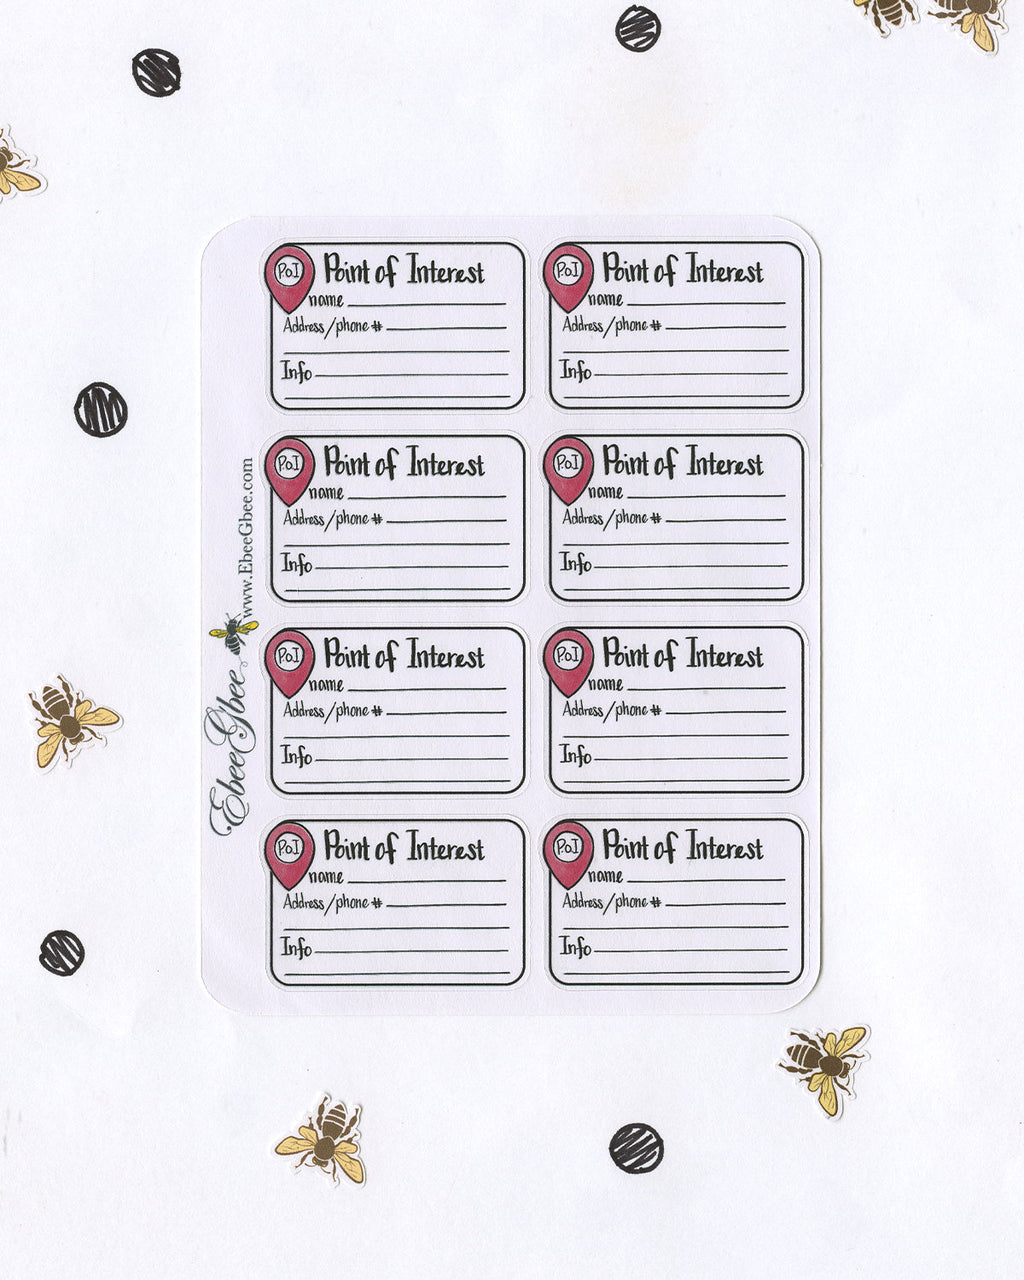 POINT OF INTEREST Planner Stickers | Hand Drawn BuJo Style